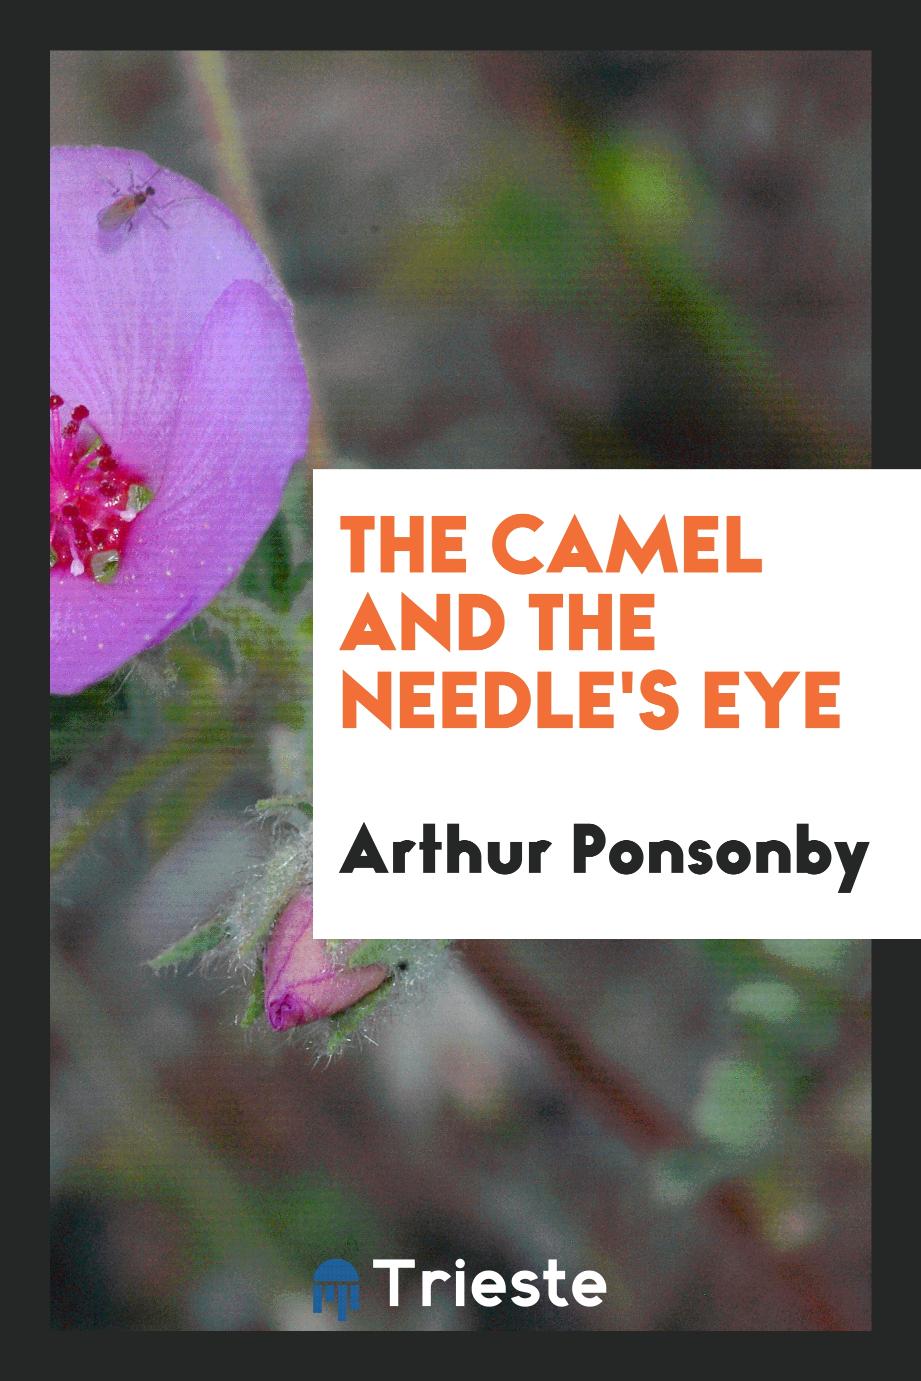 The camel and the needle's eye